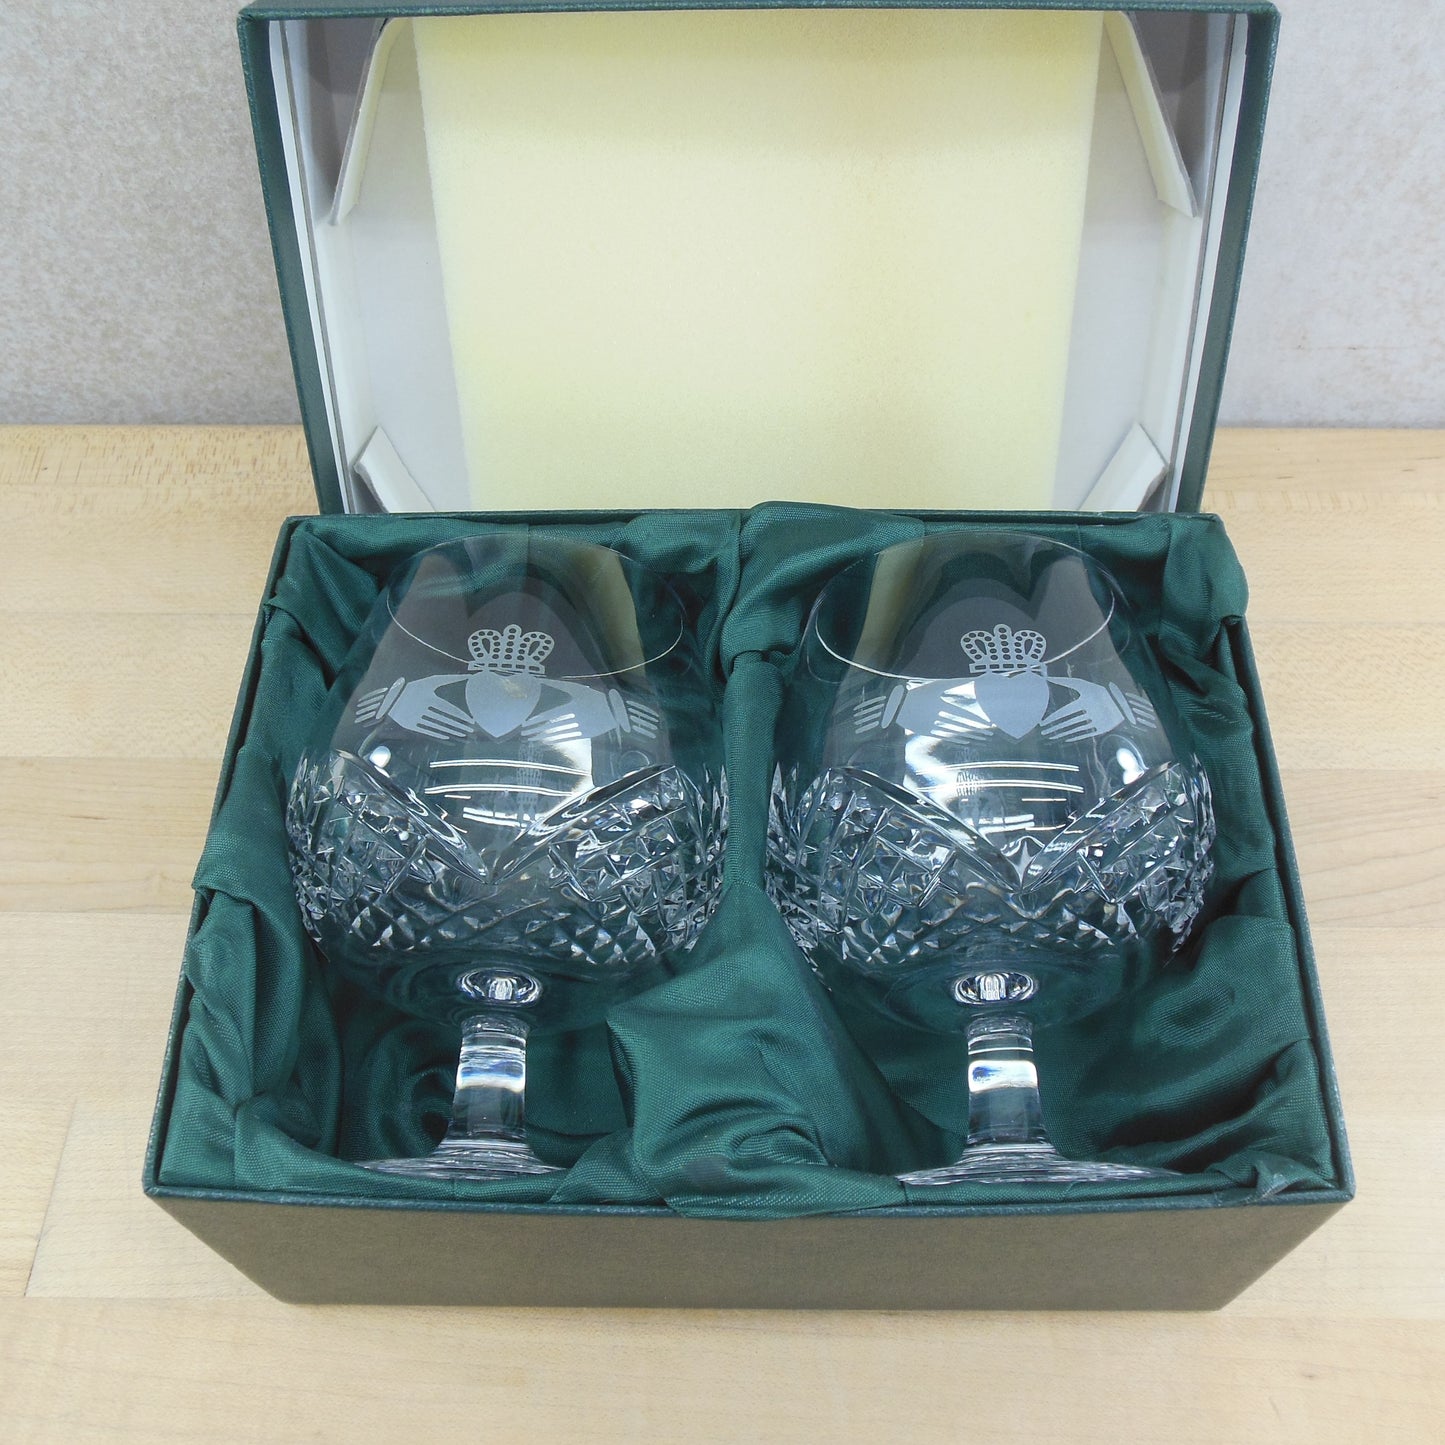 Galway Irish Crystal Claddagh Brandy Snifters Boxed Heart Hands Crown Stemware Pair Glasses